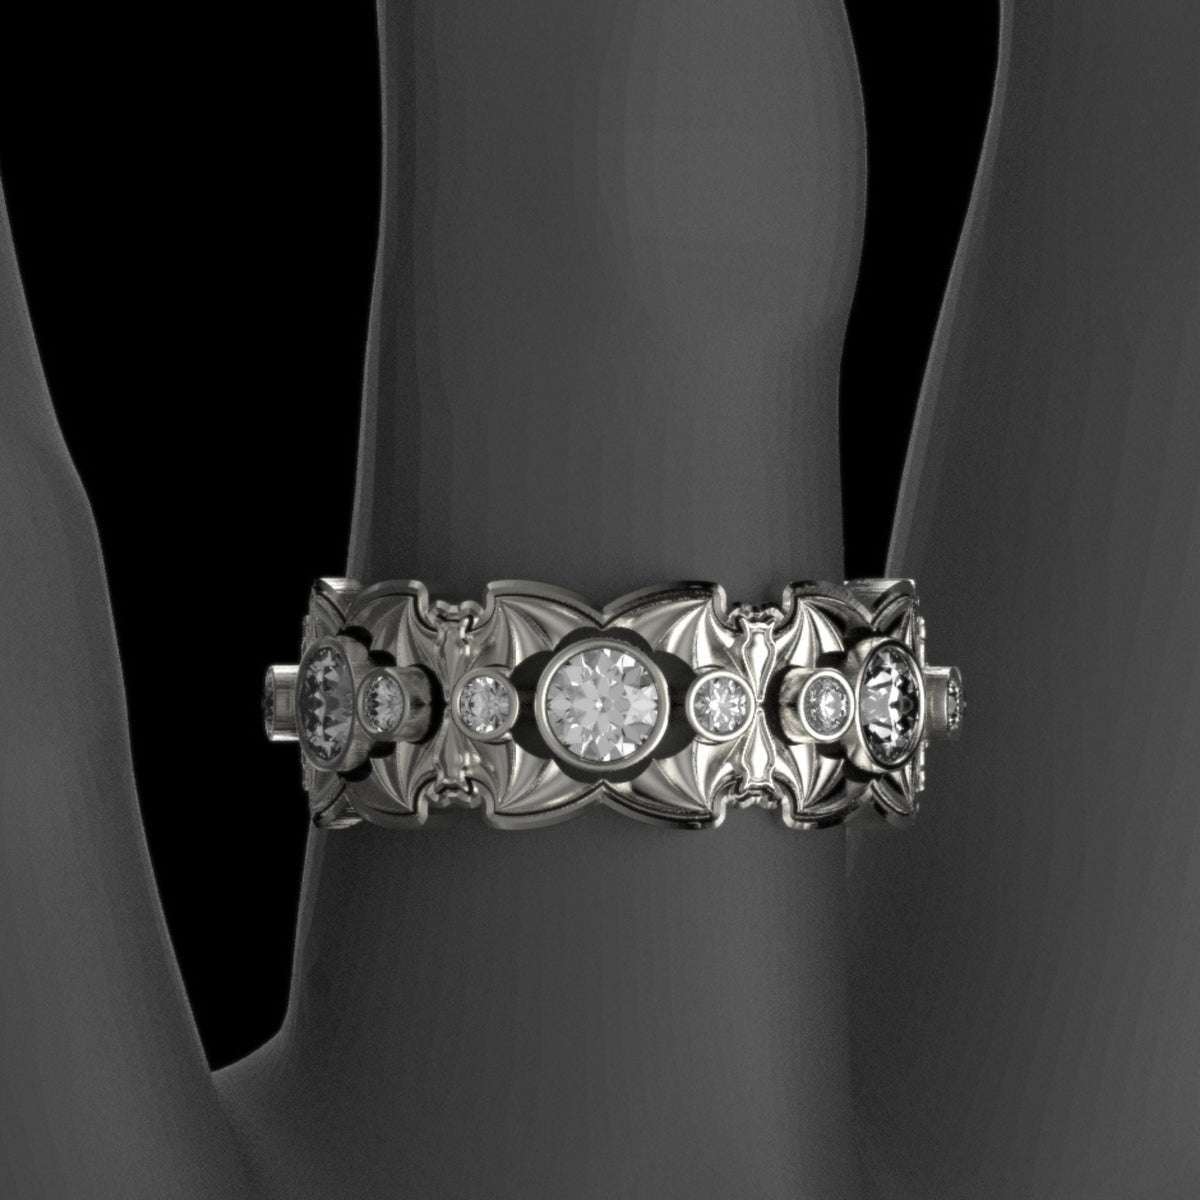 The Opulent Gothic Nightfall Double Bats Solitaire Statement Ring with White Diamonds - Just In Time for Halloween Festivities!